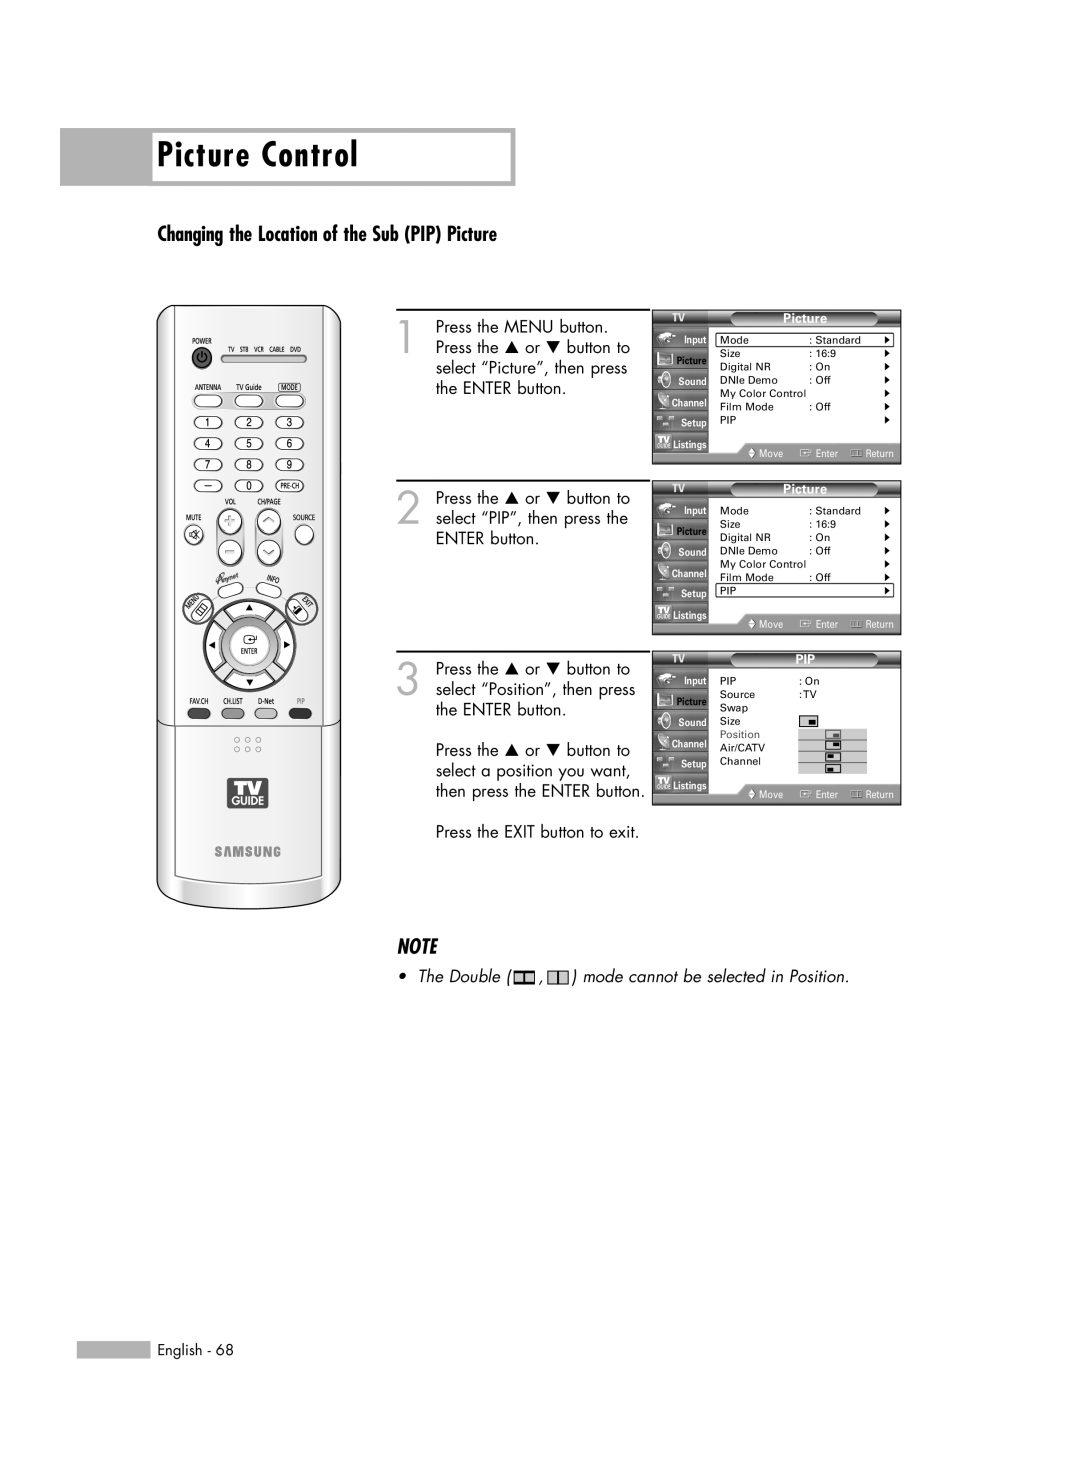 Samsung HL-R5688W manual Changing the Location of the Sub PIP Picture, Picture Control 